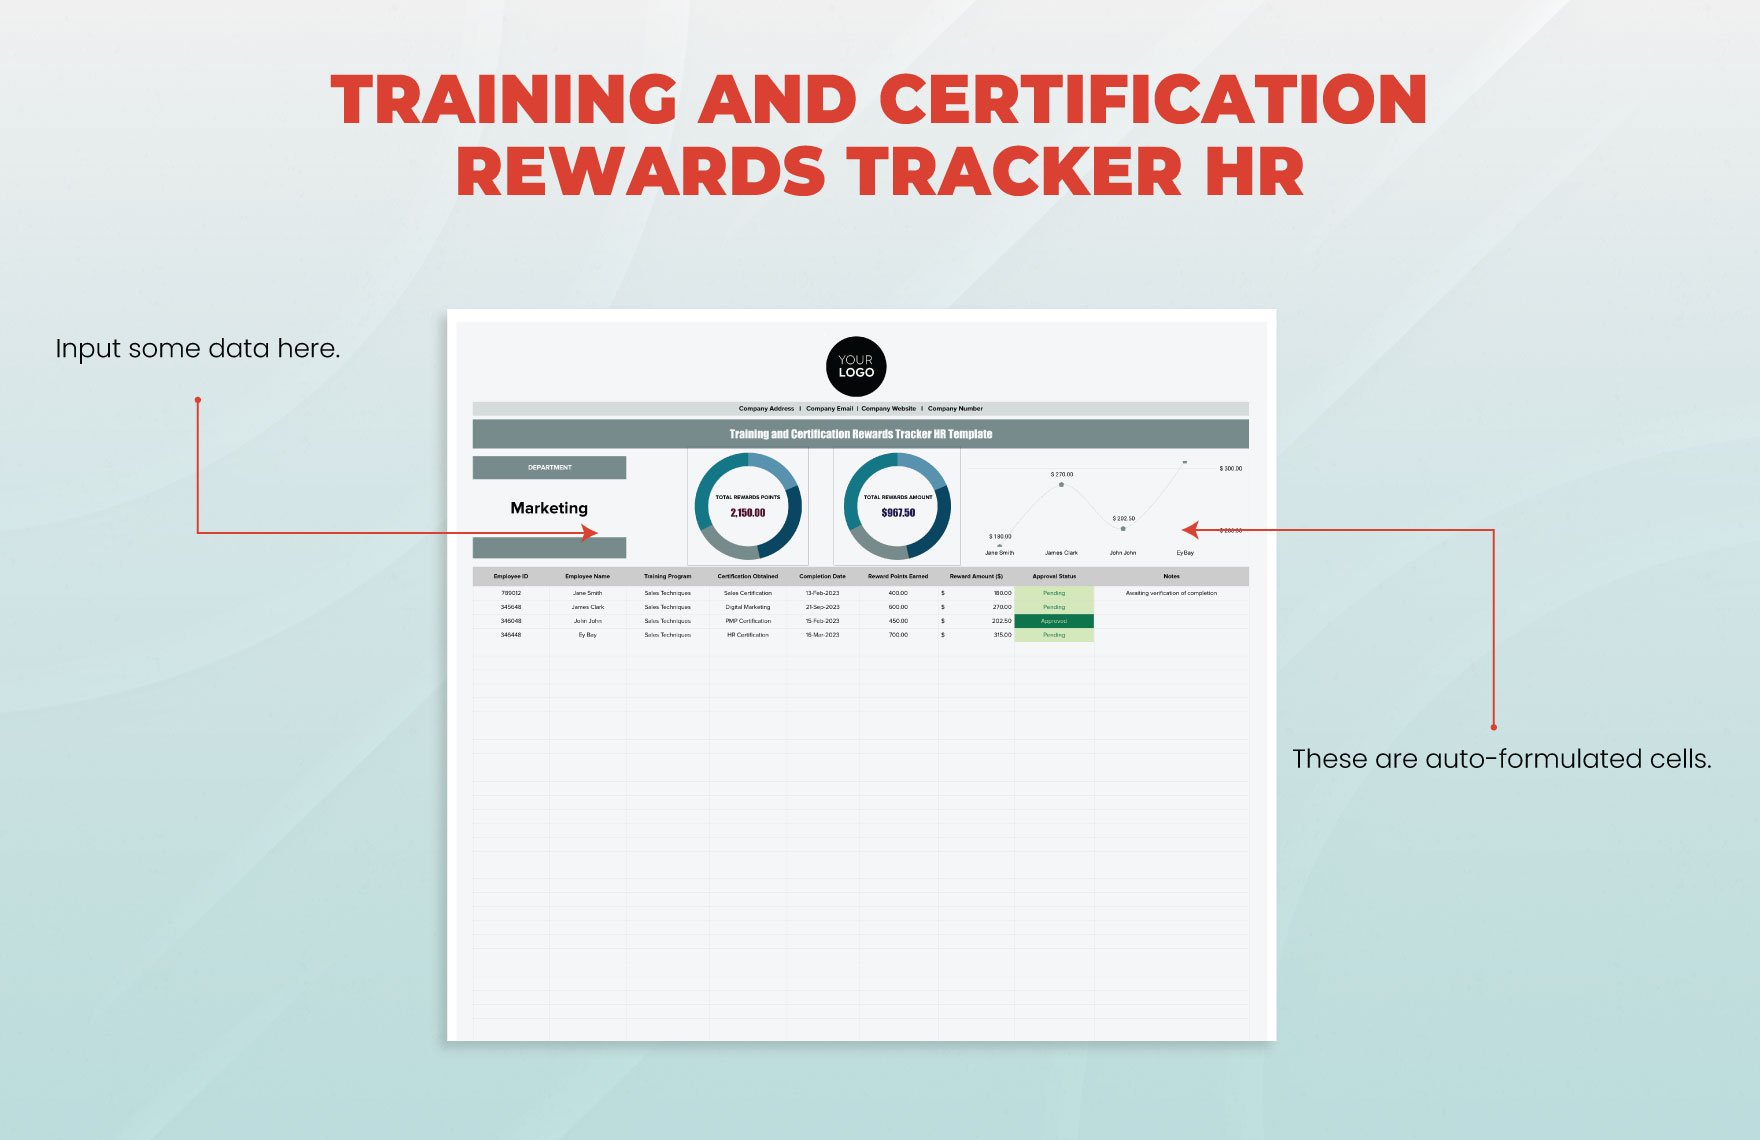 Training and Certification Rewards Tracker HR Template